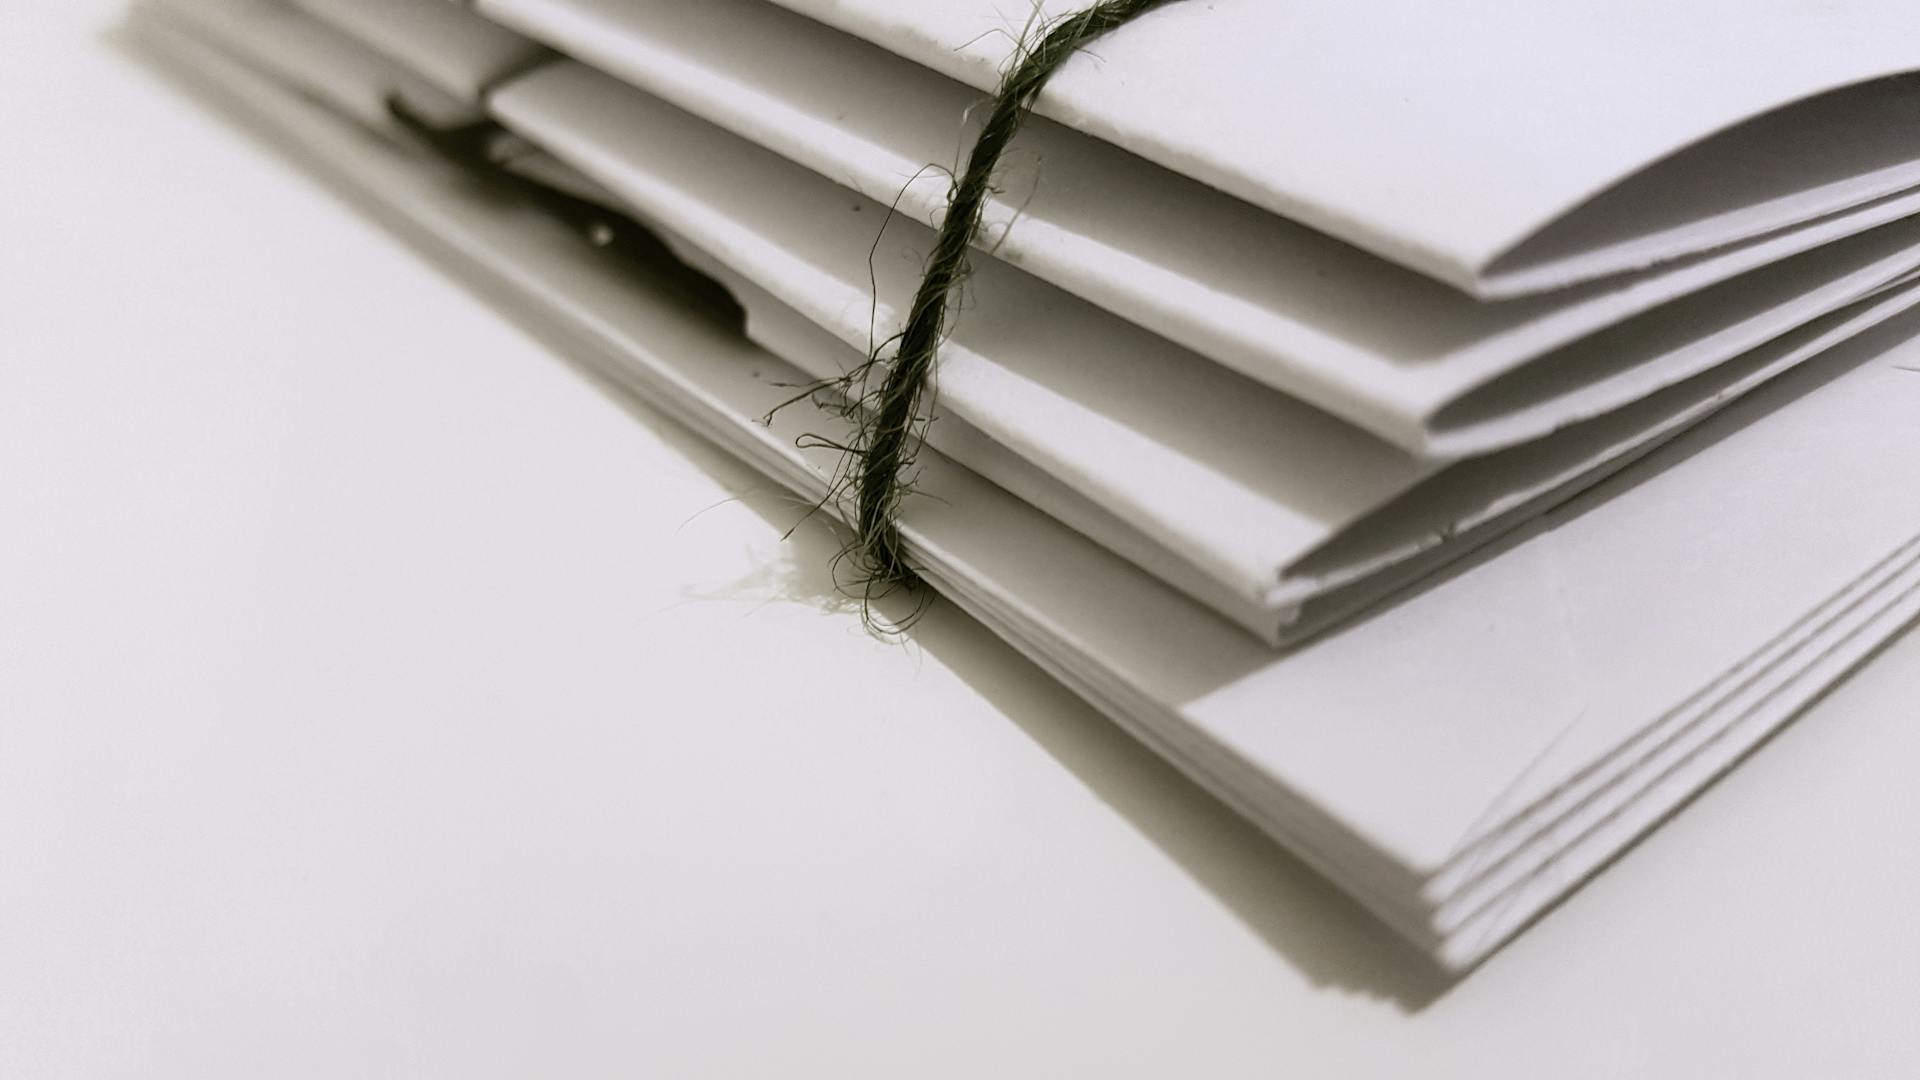 White paper bound together | Source: Pexels